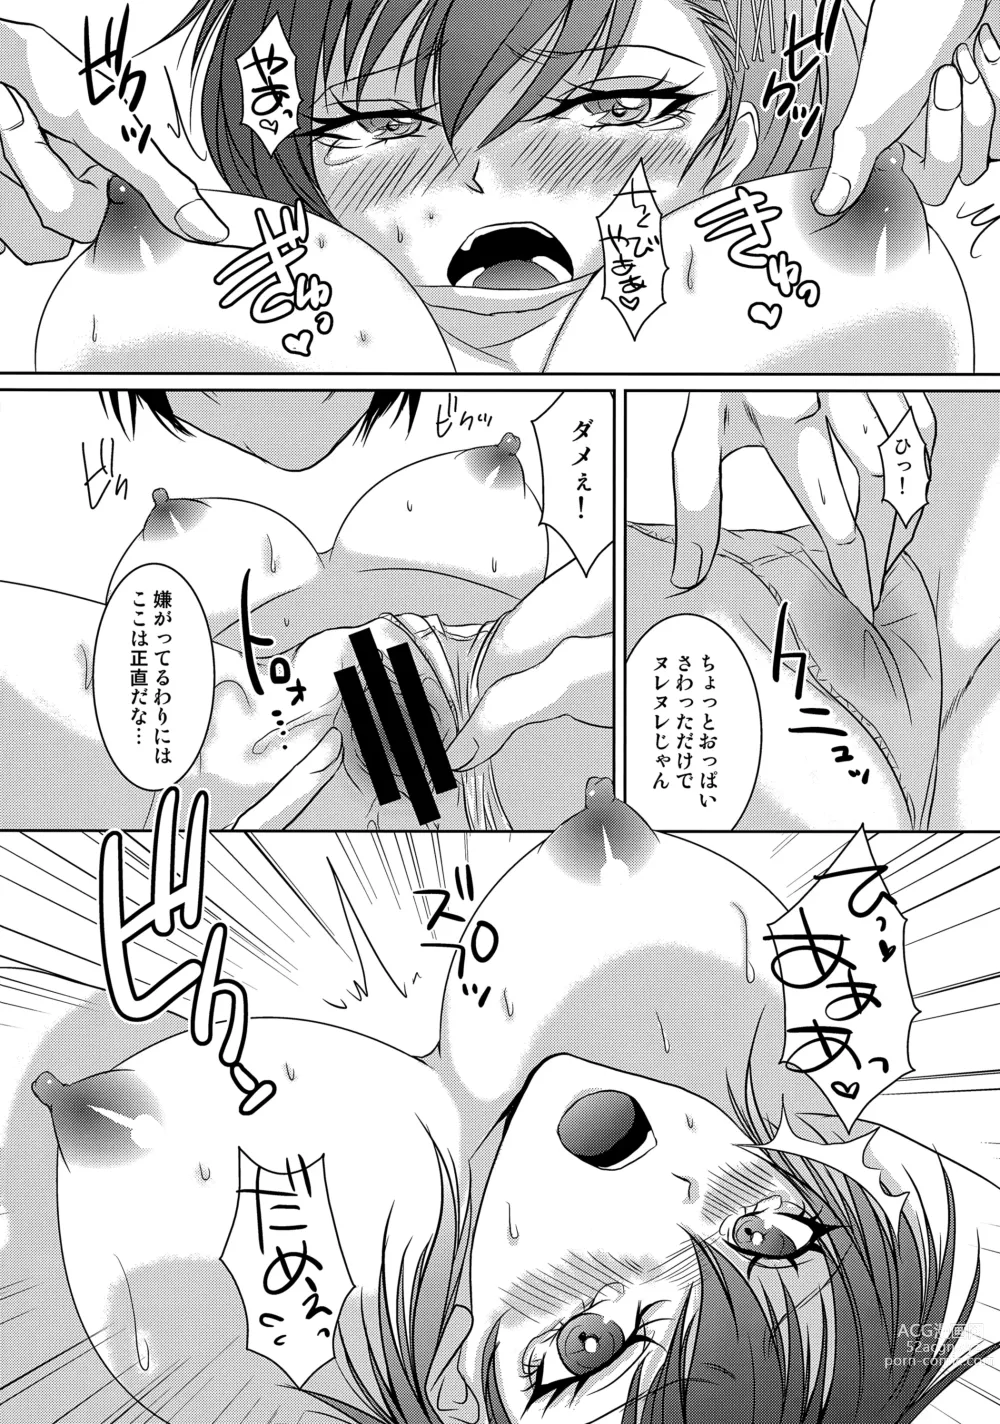 Page 9 of doujinshi Repeatedly